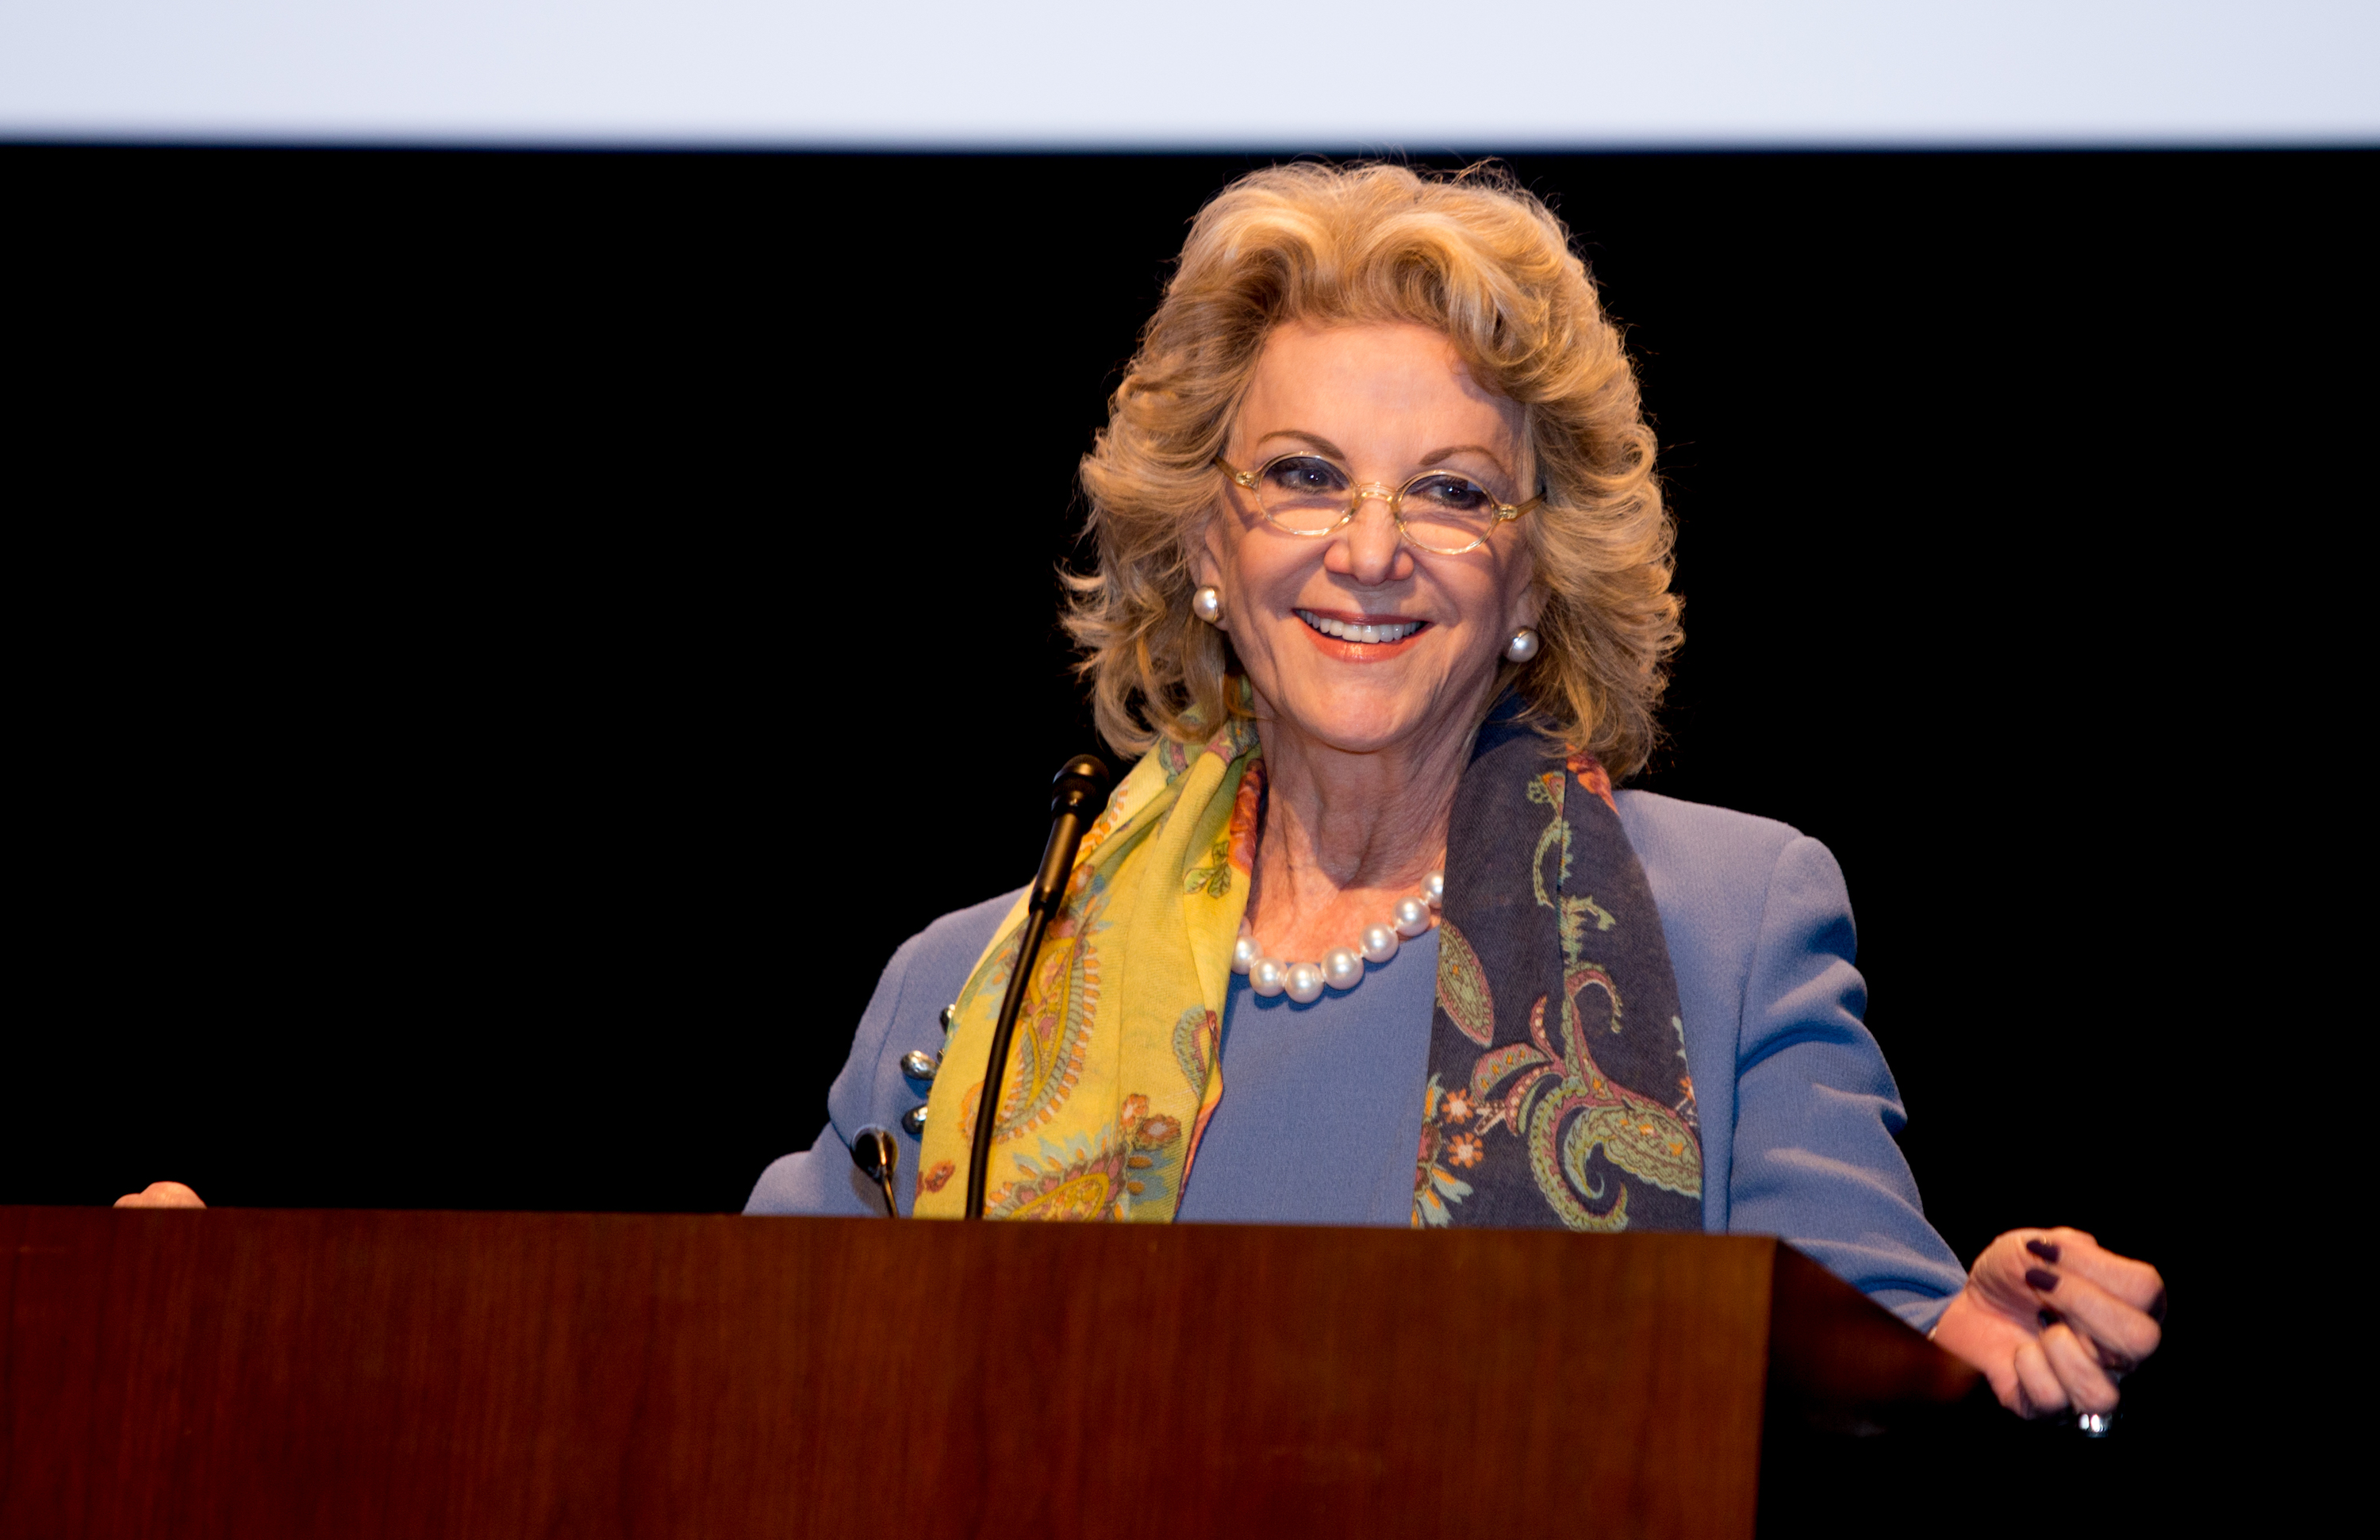 During the 2016 Business + Education (BE) Engaged Summit, Elaine Wynn spoke to attendees on the need for Nevada businesses to join efforts improving educational outcomes.